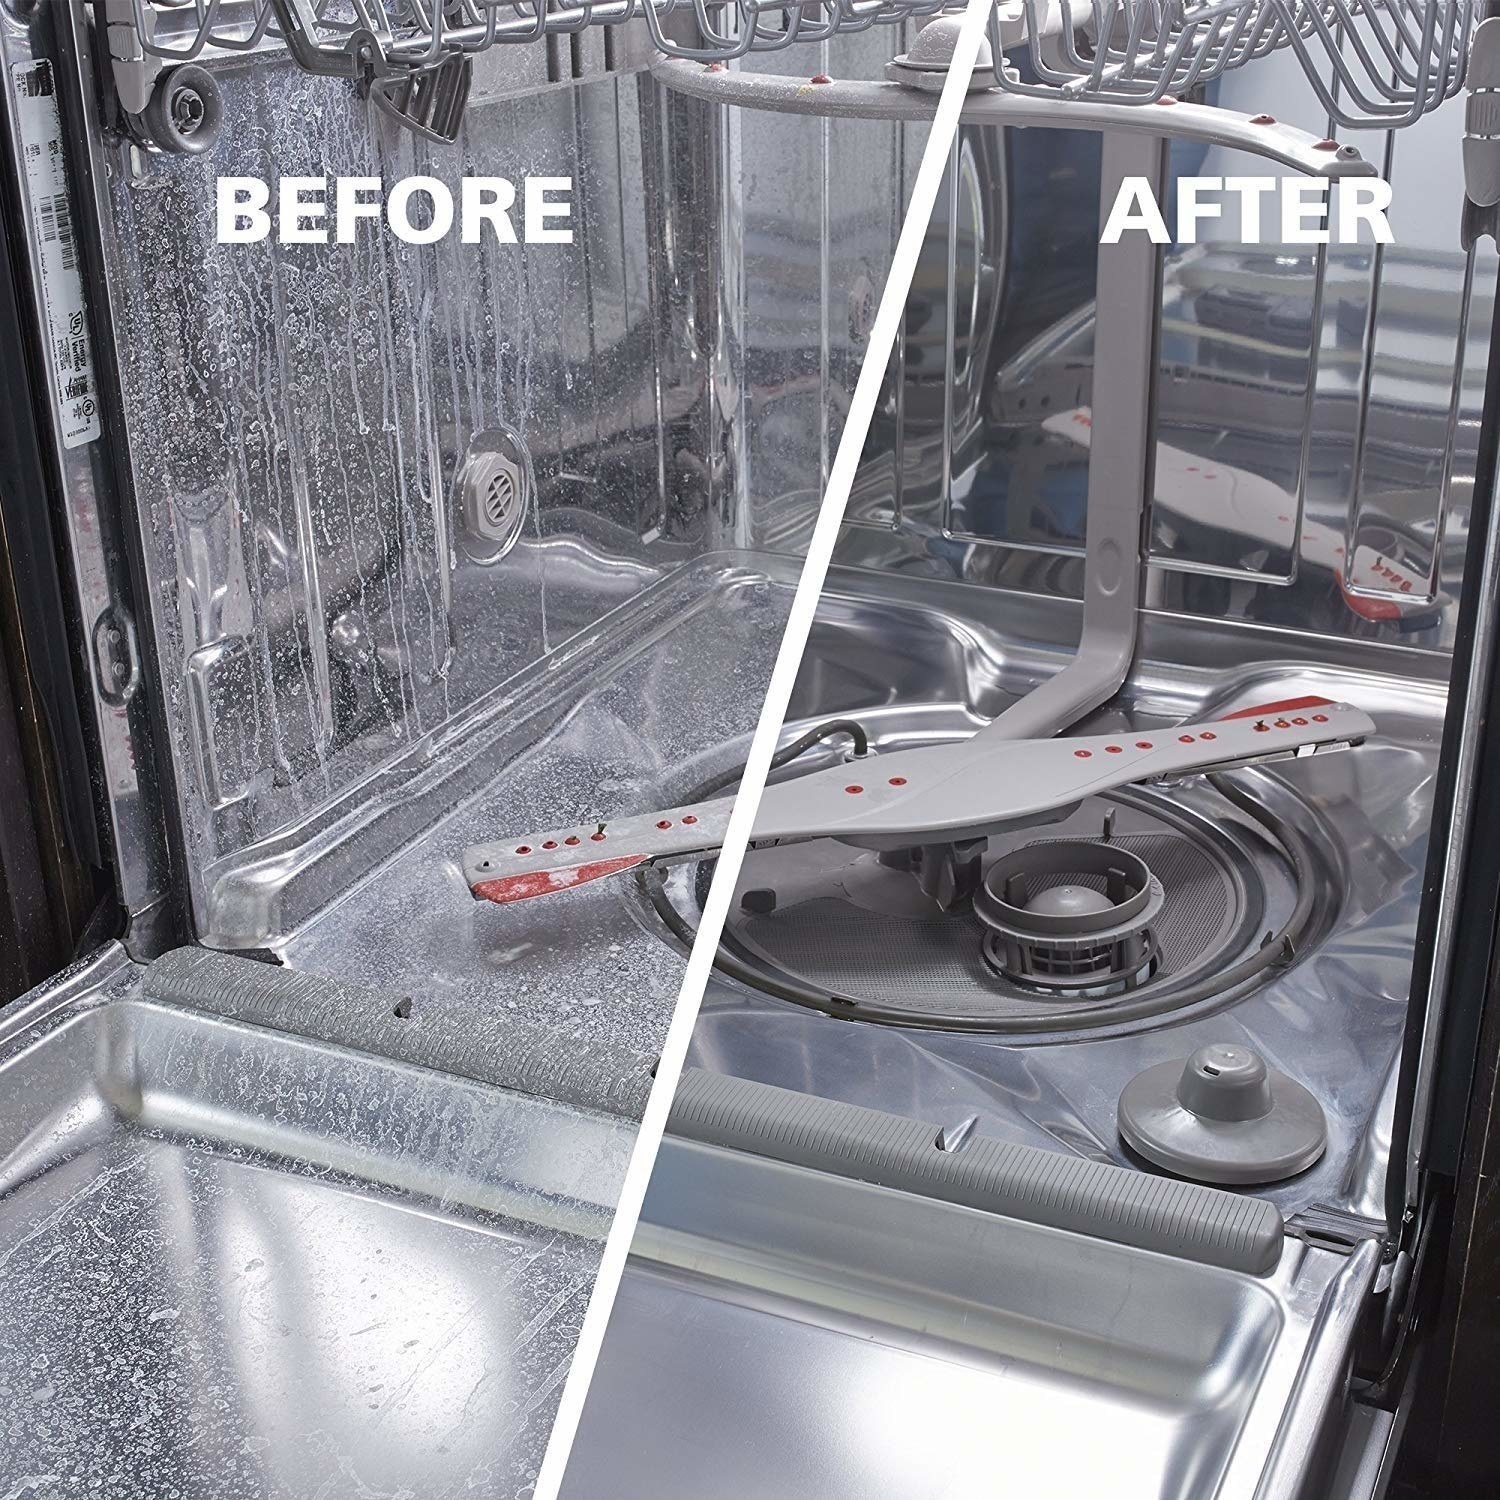 A product image of the inside of a dishwasher before (scaly and with white residue) and after (sparkling clean)